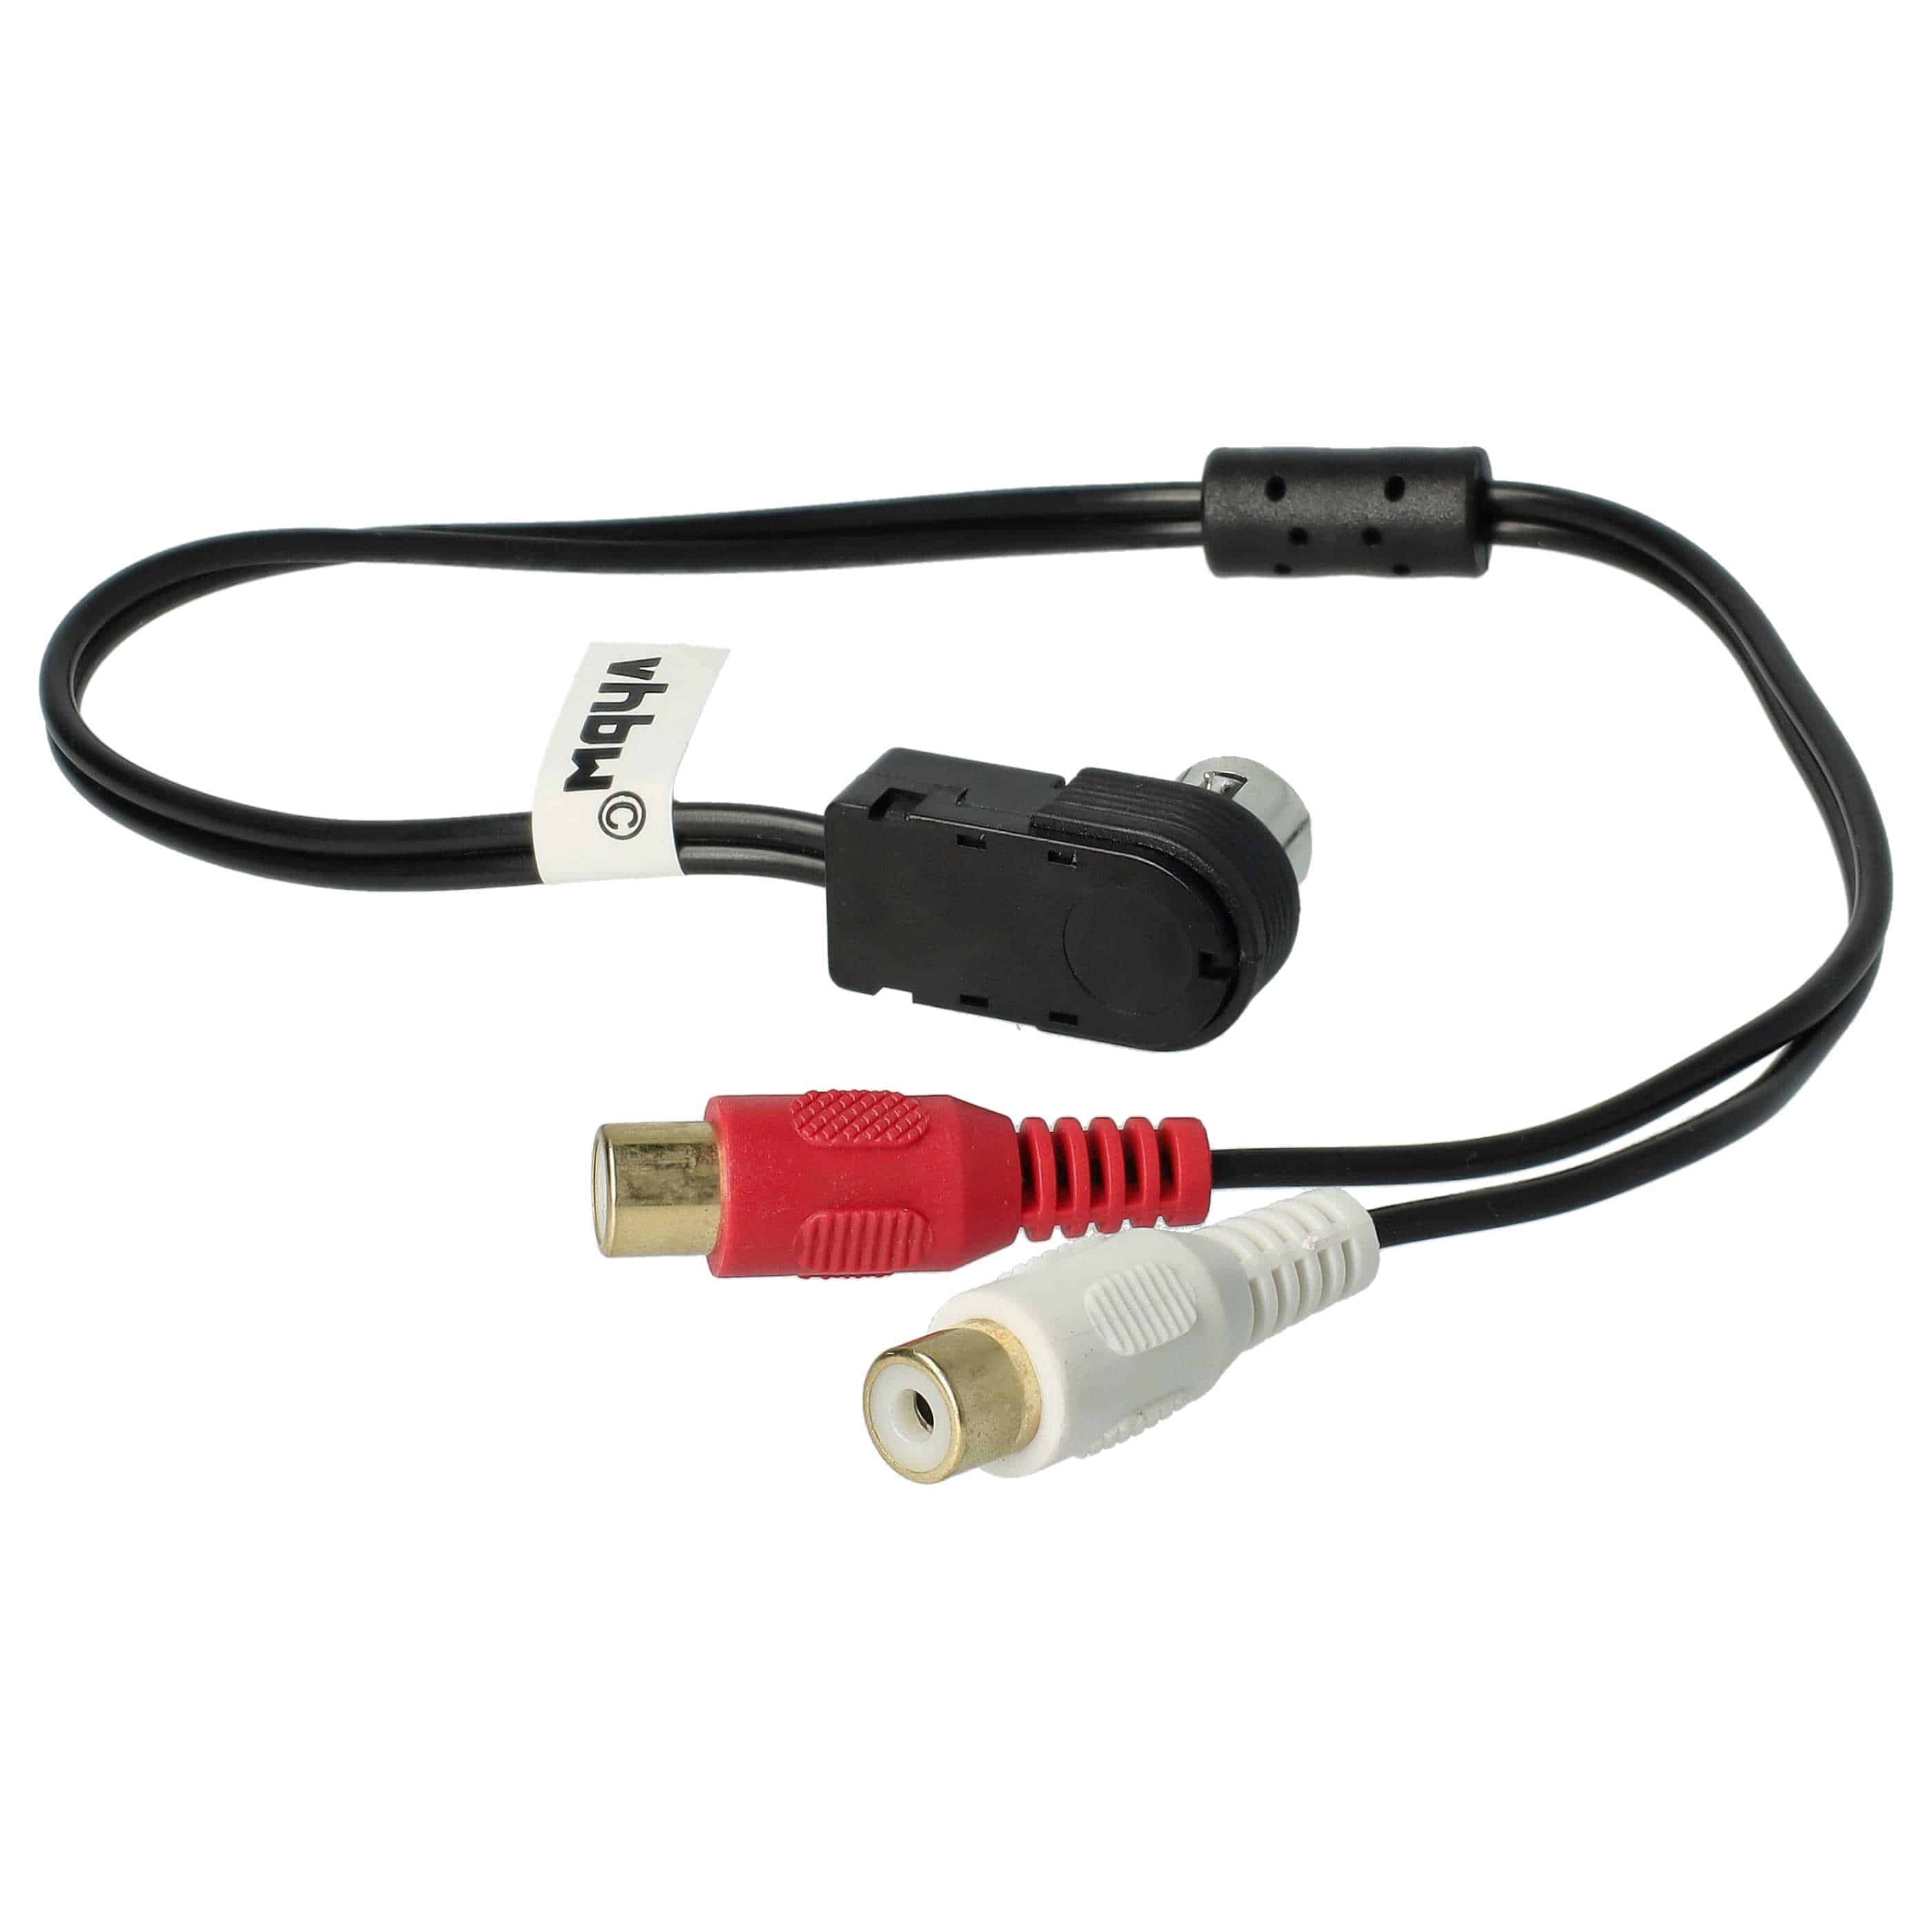 Audio Cable replaces JVC / Alpine KCA-121B for Car Radio - 60 cm long